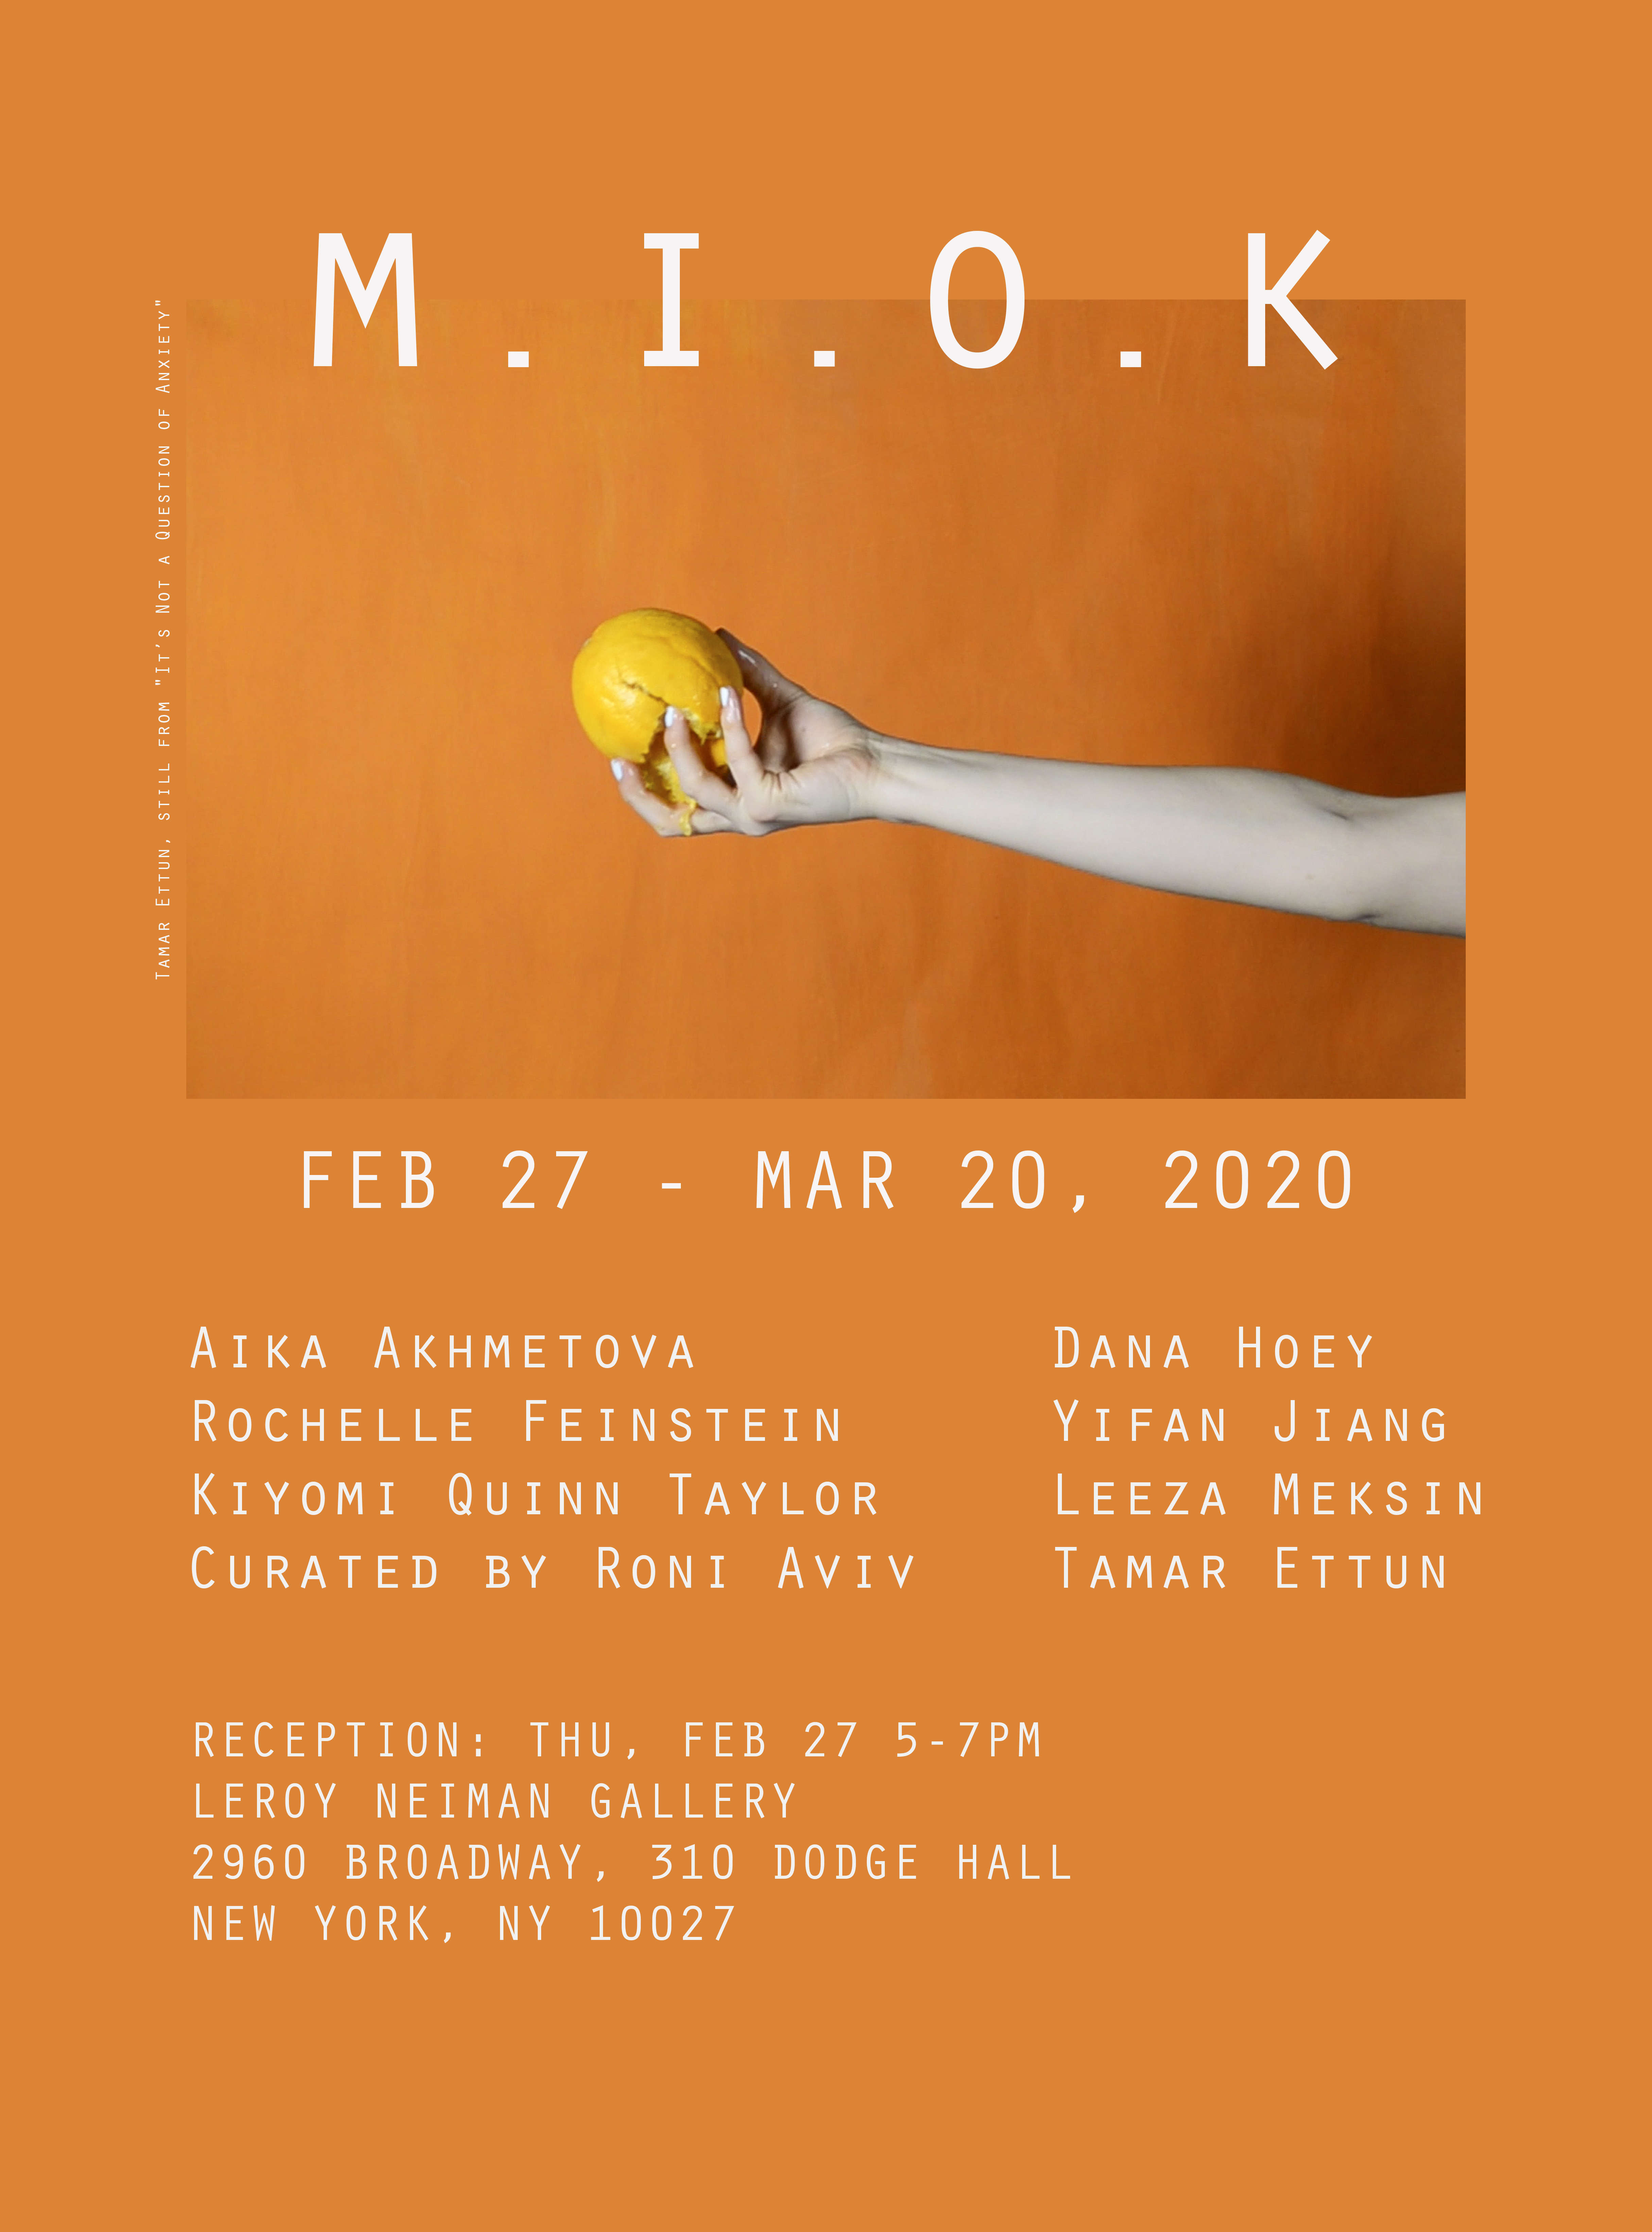 **m.i.o.k**
Opening Feb. 27th 5-7pm
Closing Mar. 20th
LeRoy Neiman Gallery, Columbia University

Aika Akhmetova, Tamar Ettun, Rochelle Feinstein, Dana Hoey, Yifan Jiang, Leeza Meksin, Kiyomi Quinn Taylor

Curator: Roni Aviv

m.i.o.k is an exhibition featuring the work of seven contemporary artists. It reflects on the absurdity of being. Each artist, in their own way, challenges the ‘socially appropriate’ norms and constructs.